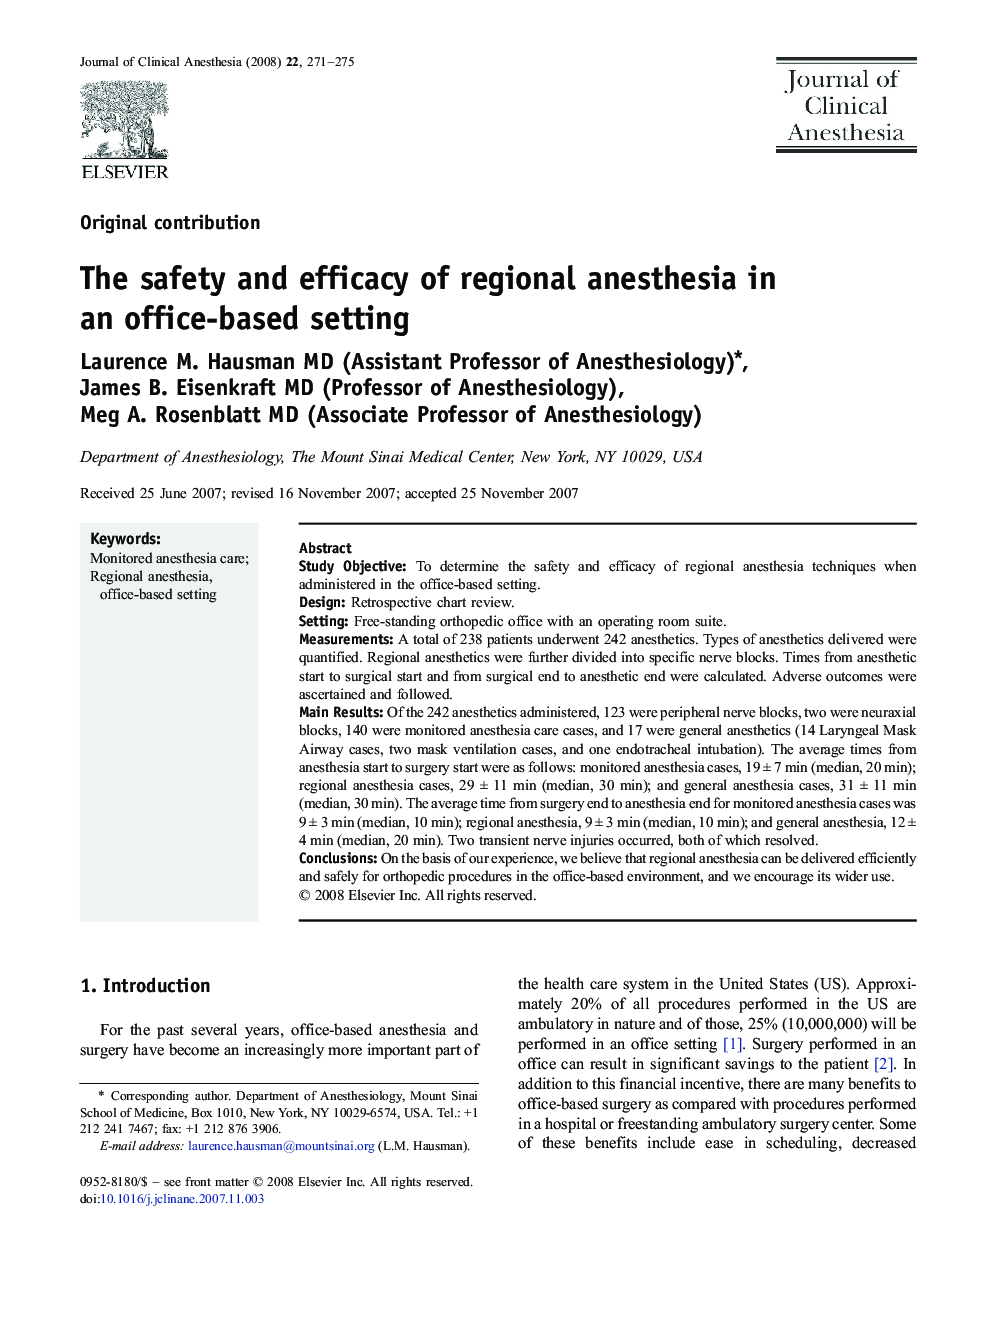 The safety and efficacy of regional anesthesia in an office-based setting